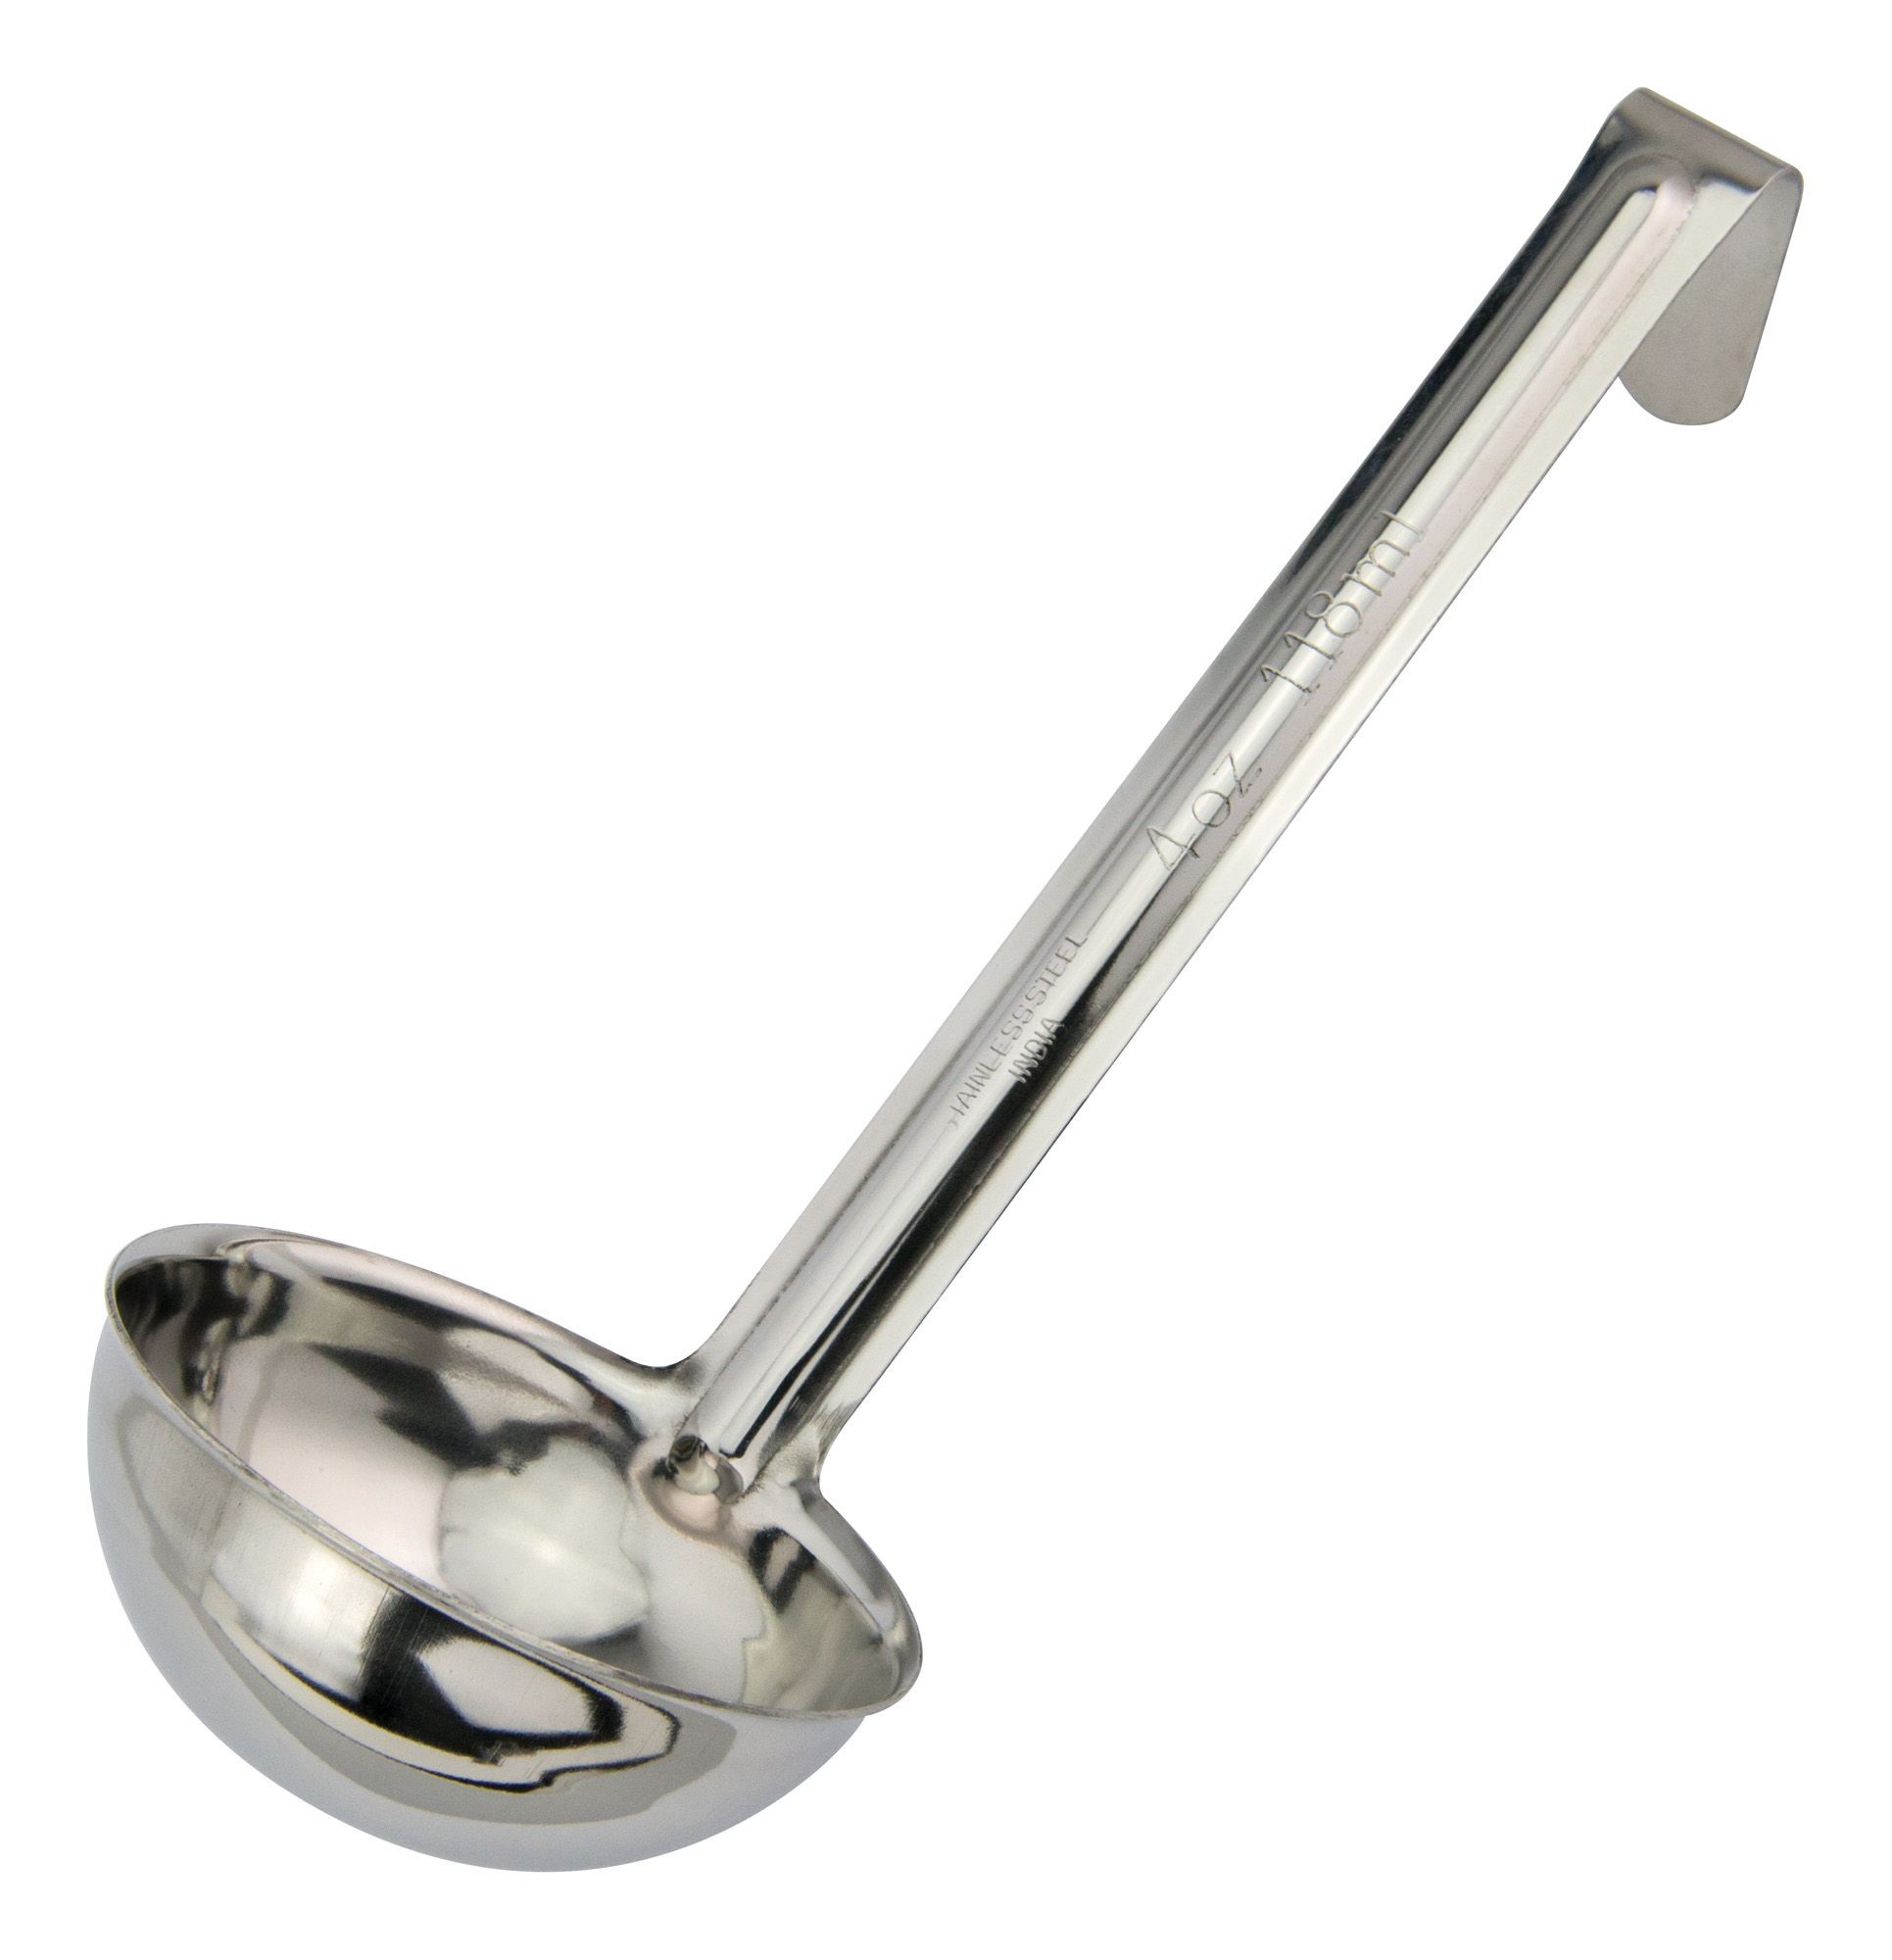 Winco LDI-40SH Stainless Steel One-Piece Short Handle Ladle 4 oz.